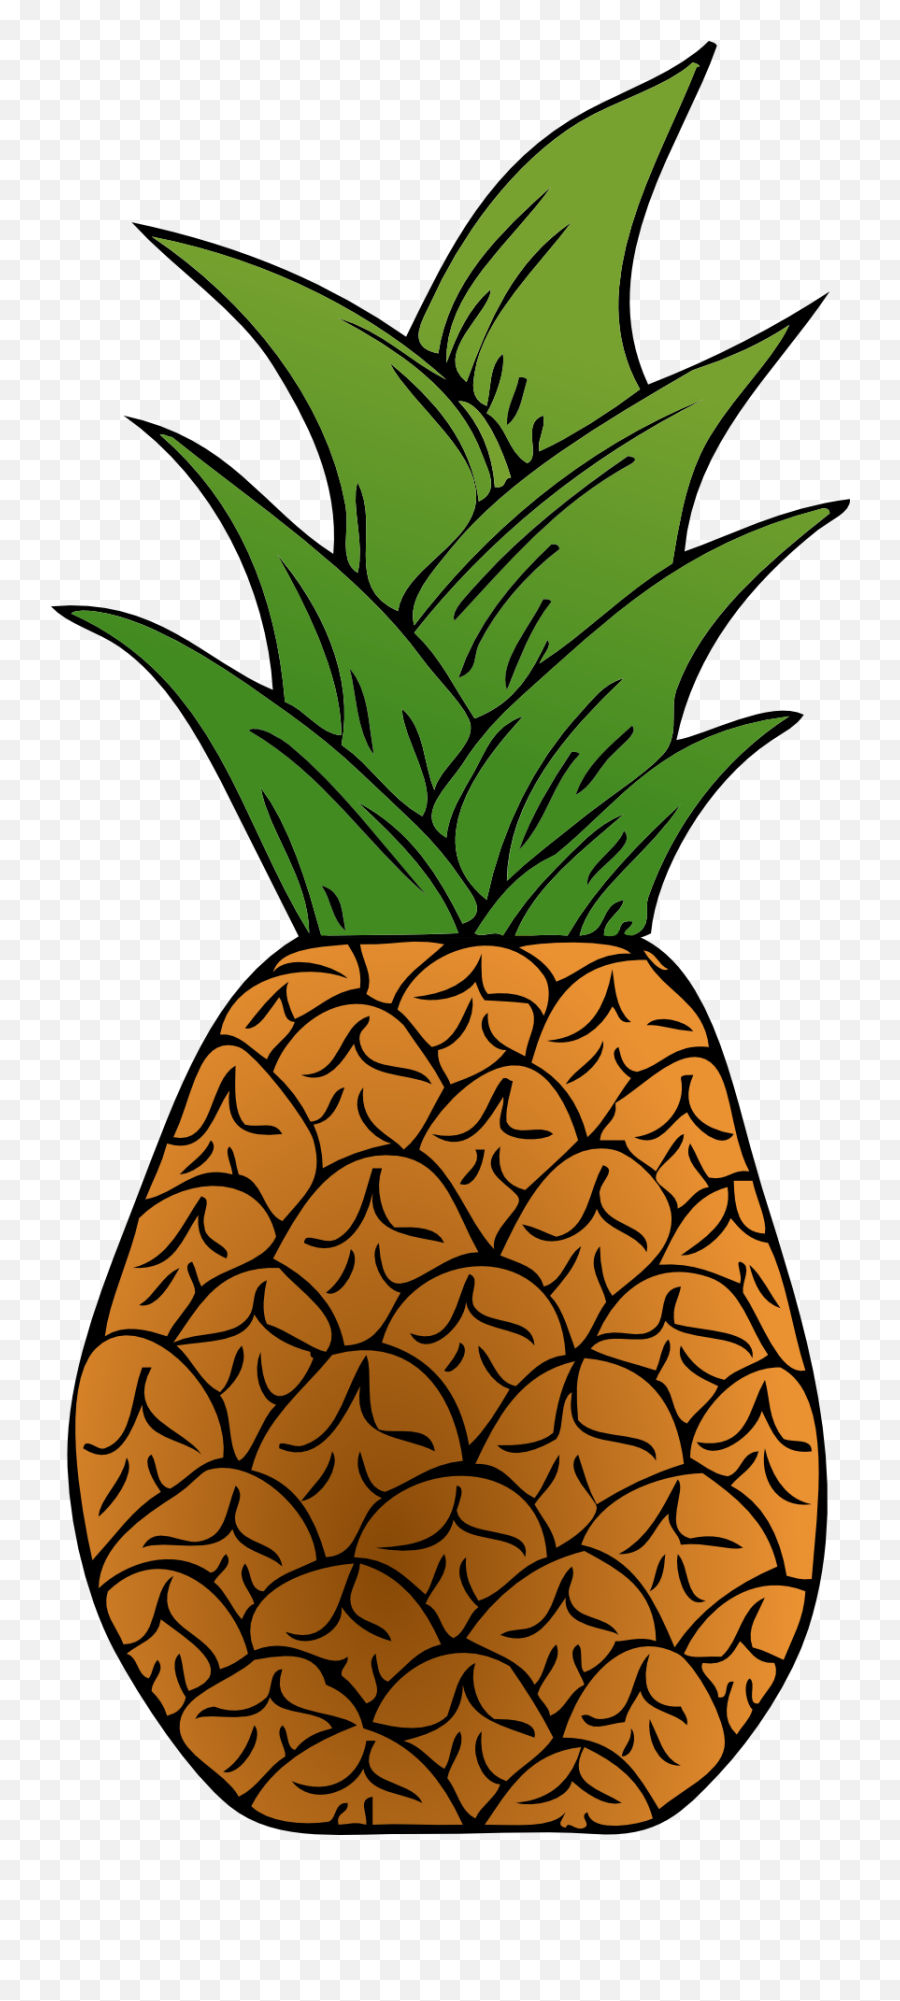 Exotic Fresh Pineapple Clipart Free Image - Pineapple Clip Art Emoji,Pineapple Clipart